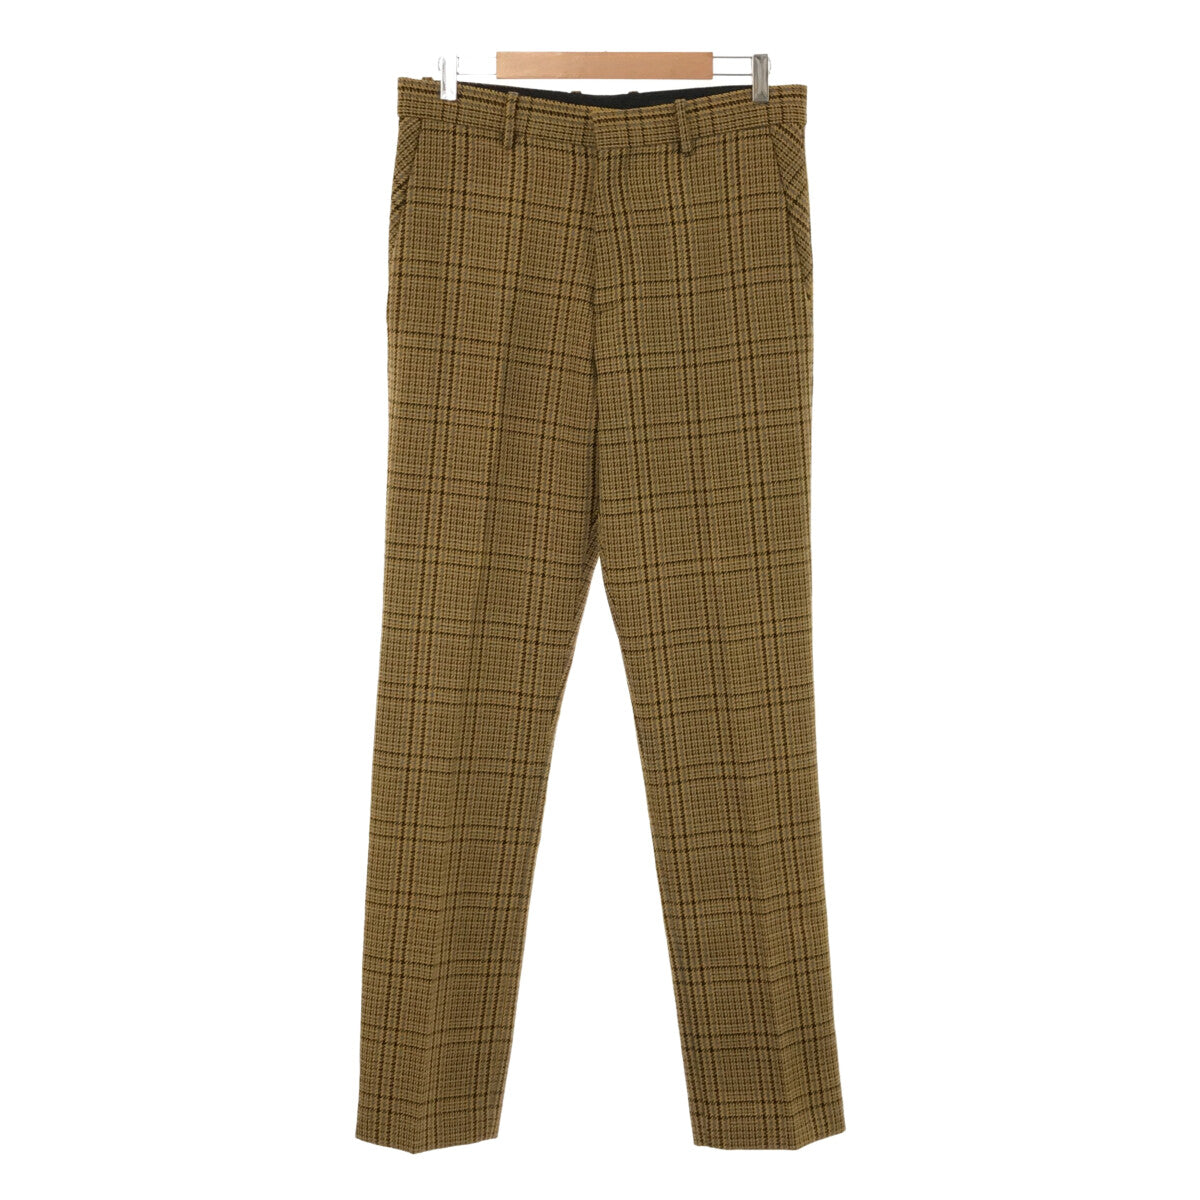 BOTTER / ボッター | Slim Fit Trousers With Zip Check ウールパンツ